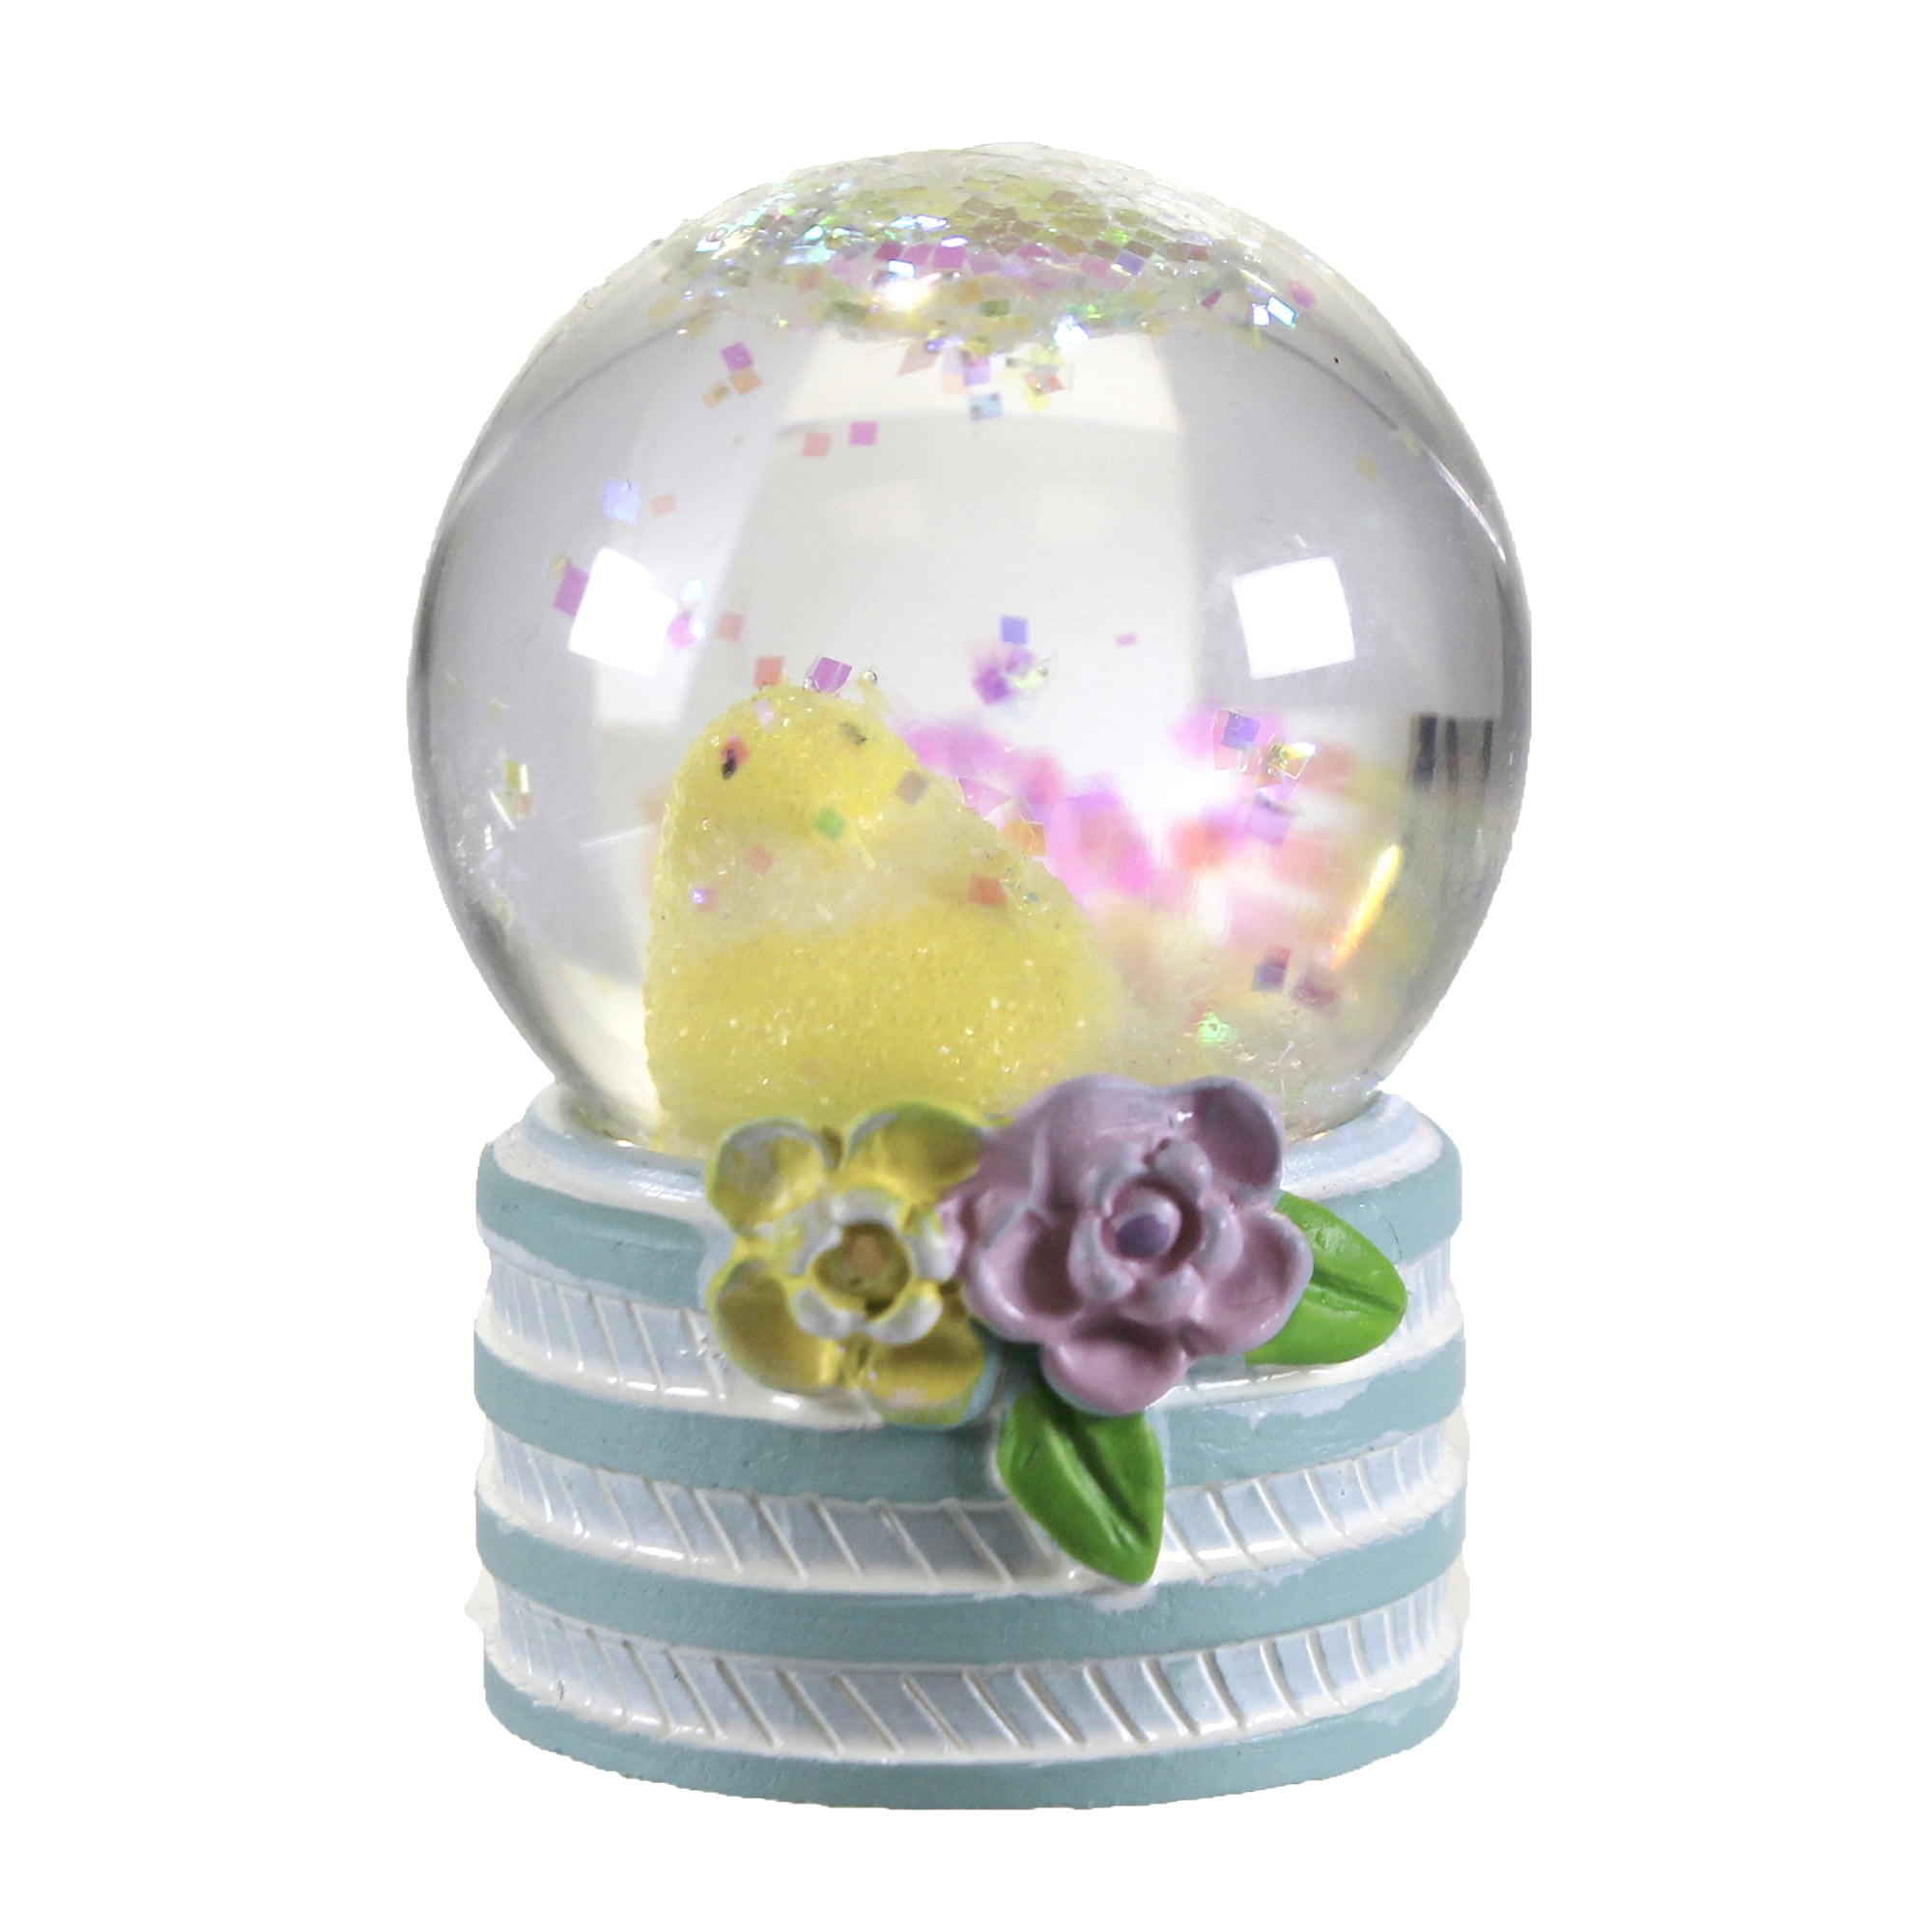 Waterball Gigt Decor Decorate Gg0049 Blue Snow Globes Plastic 2.0 Easter Small Peeps Chick Water Globe